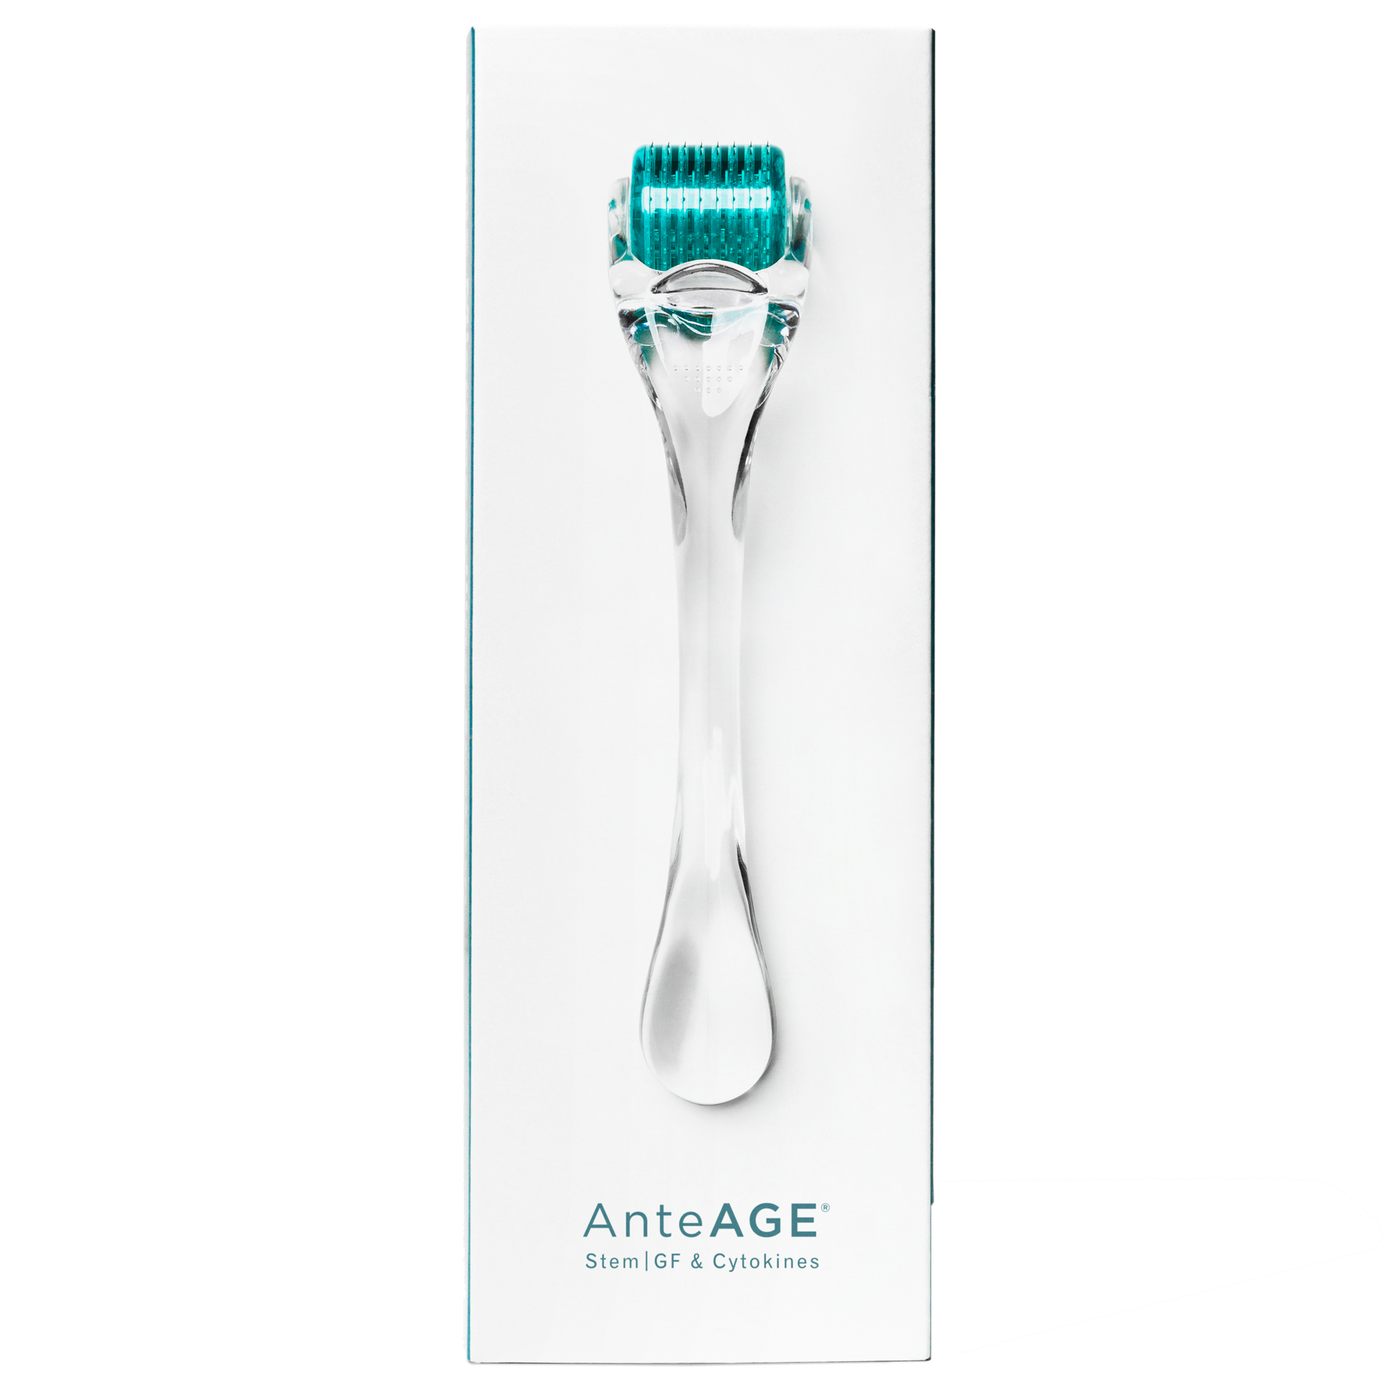 AnteAGE Home Microneedling Kit Curated Wellness